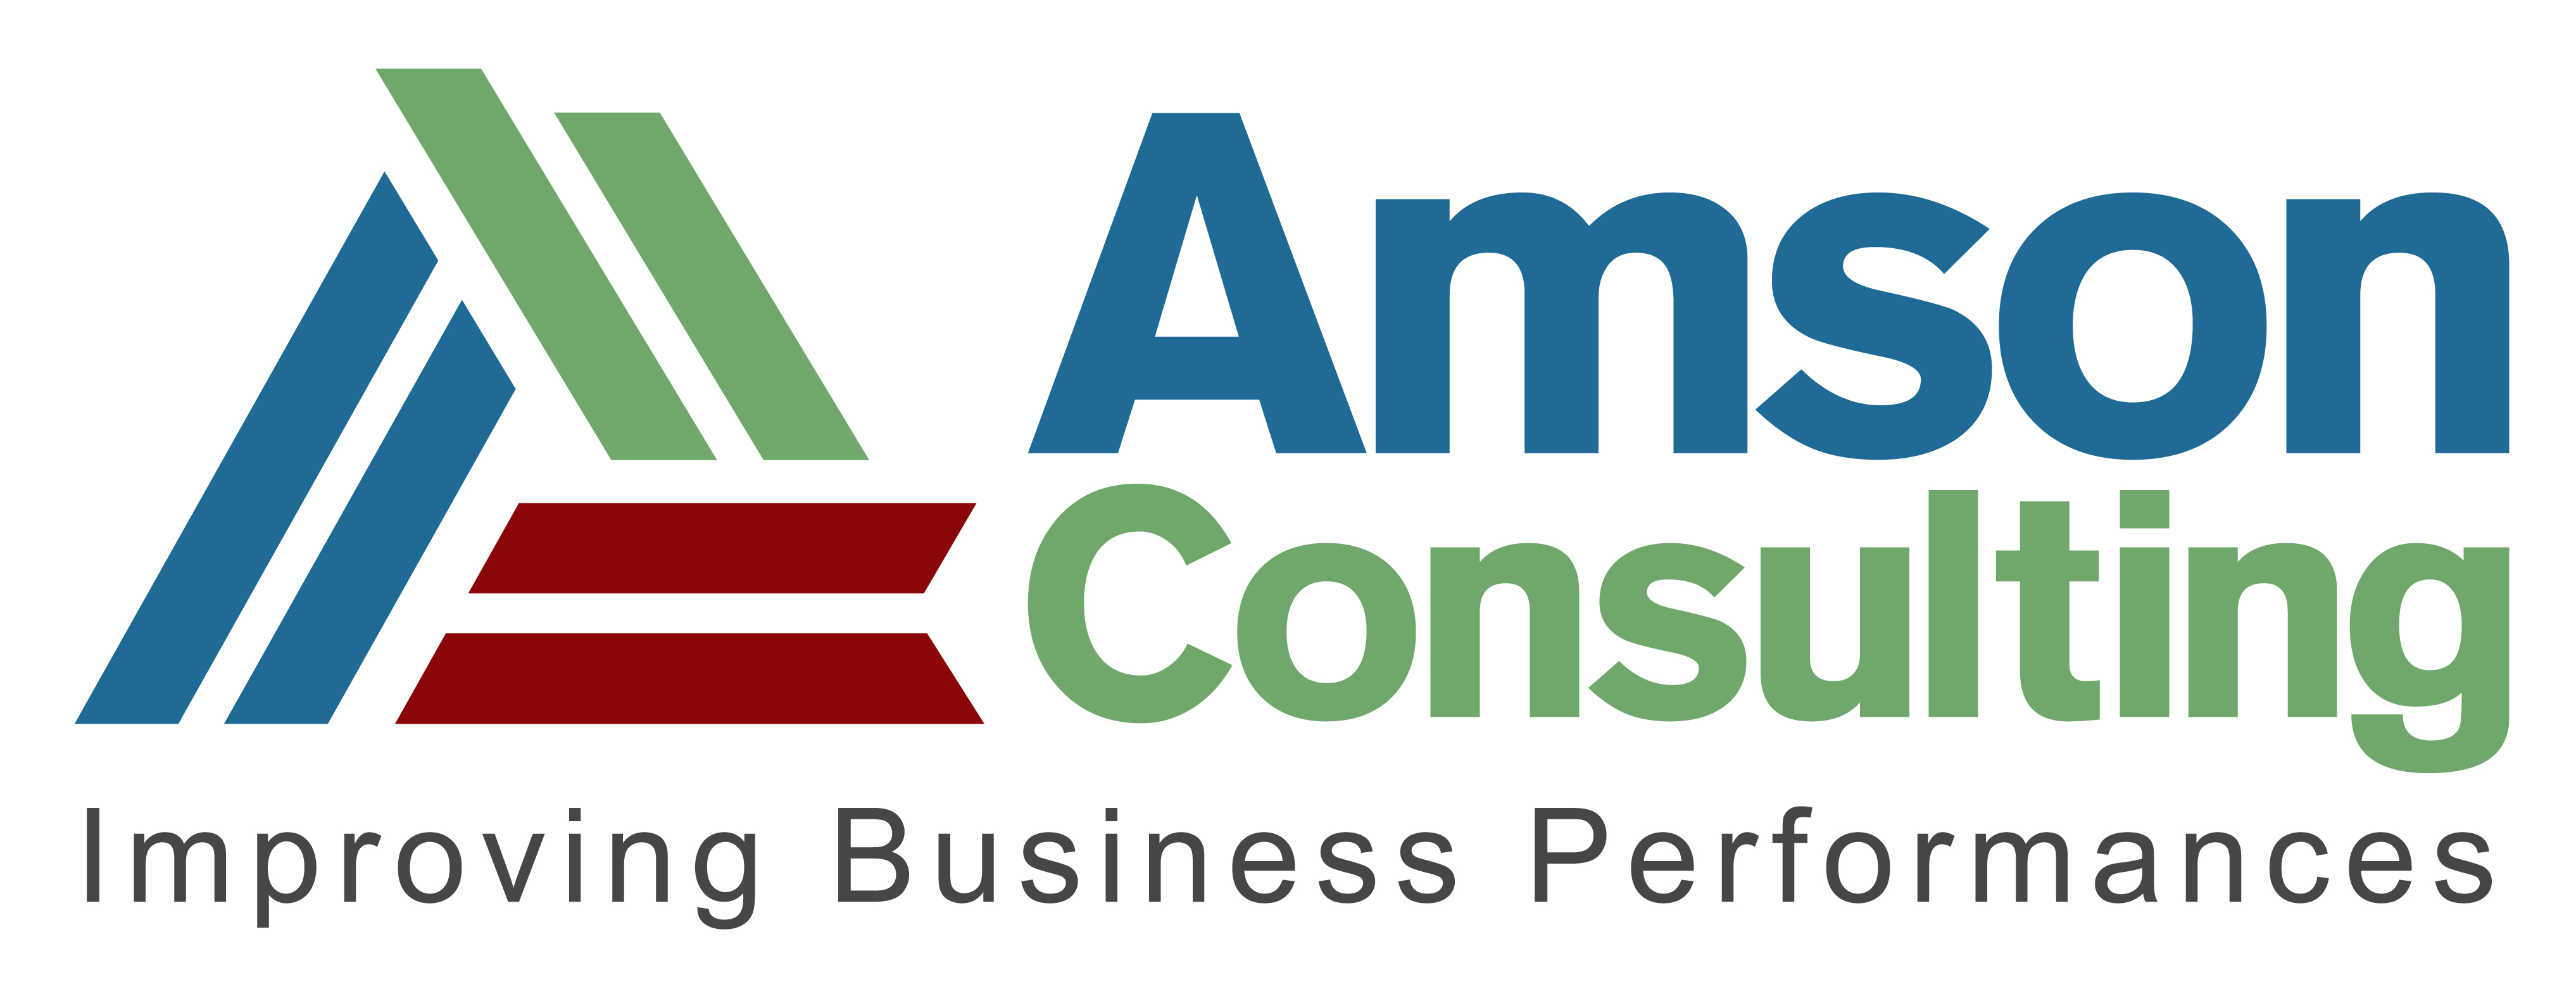 Amson Consulting